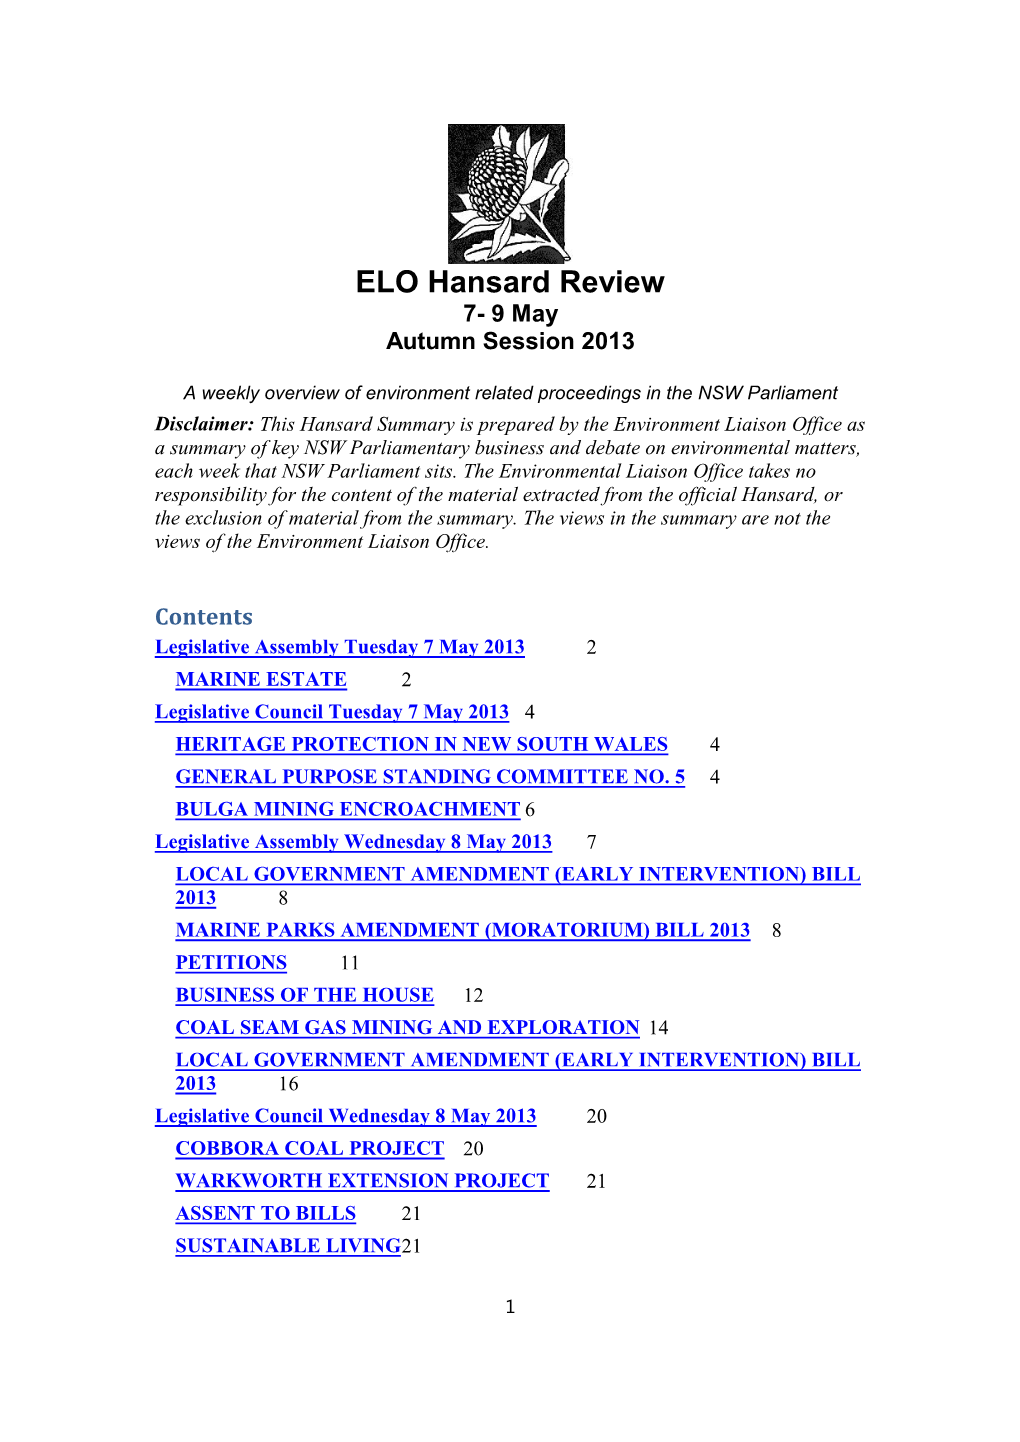 ELO Hansard Review 7- 9 May Autumn Session 2013